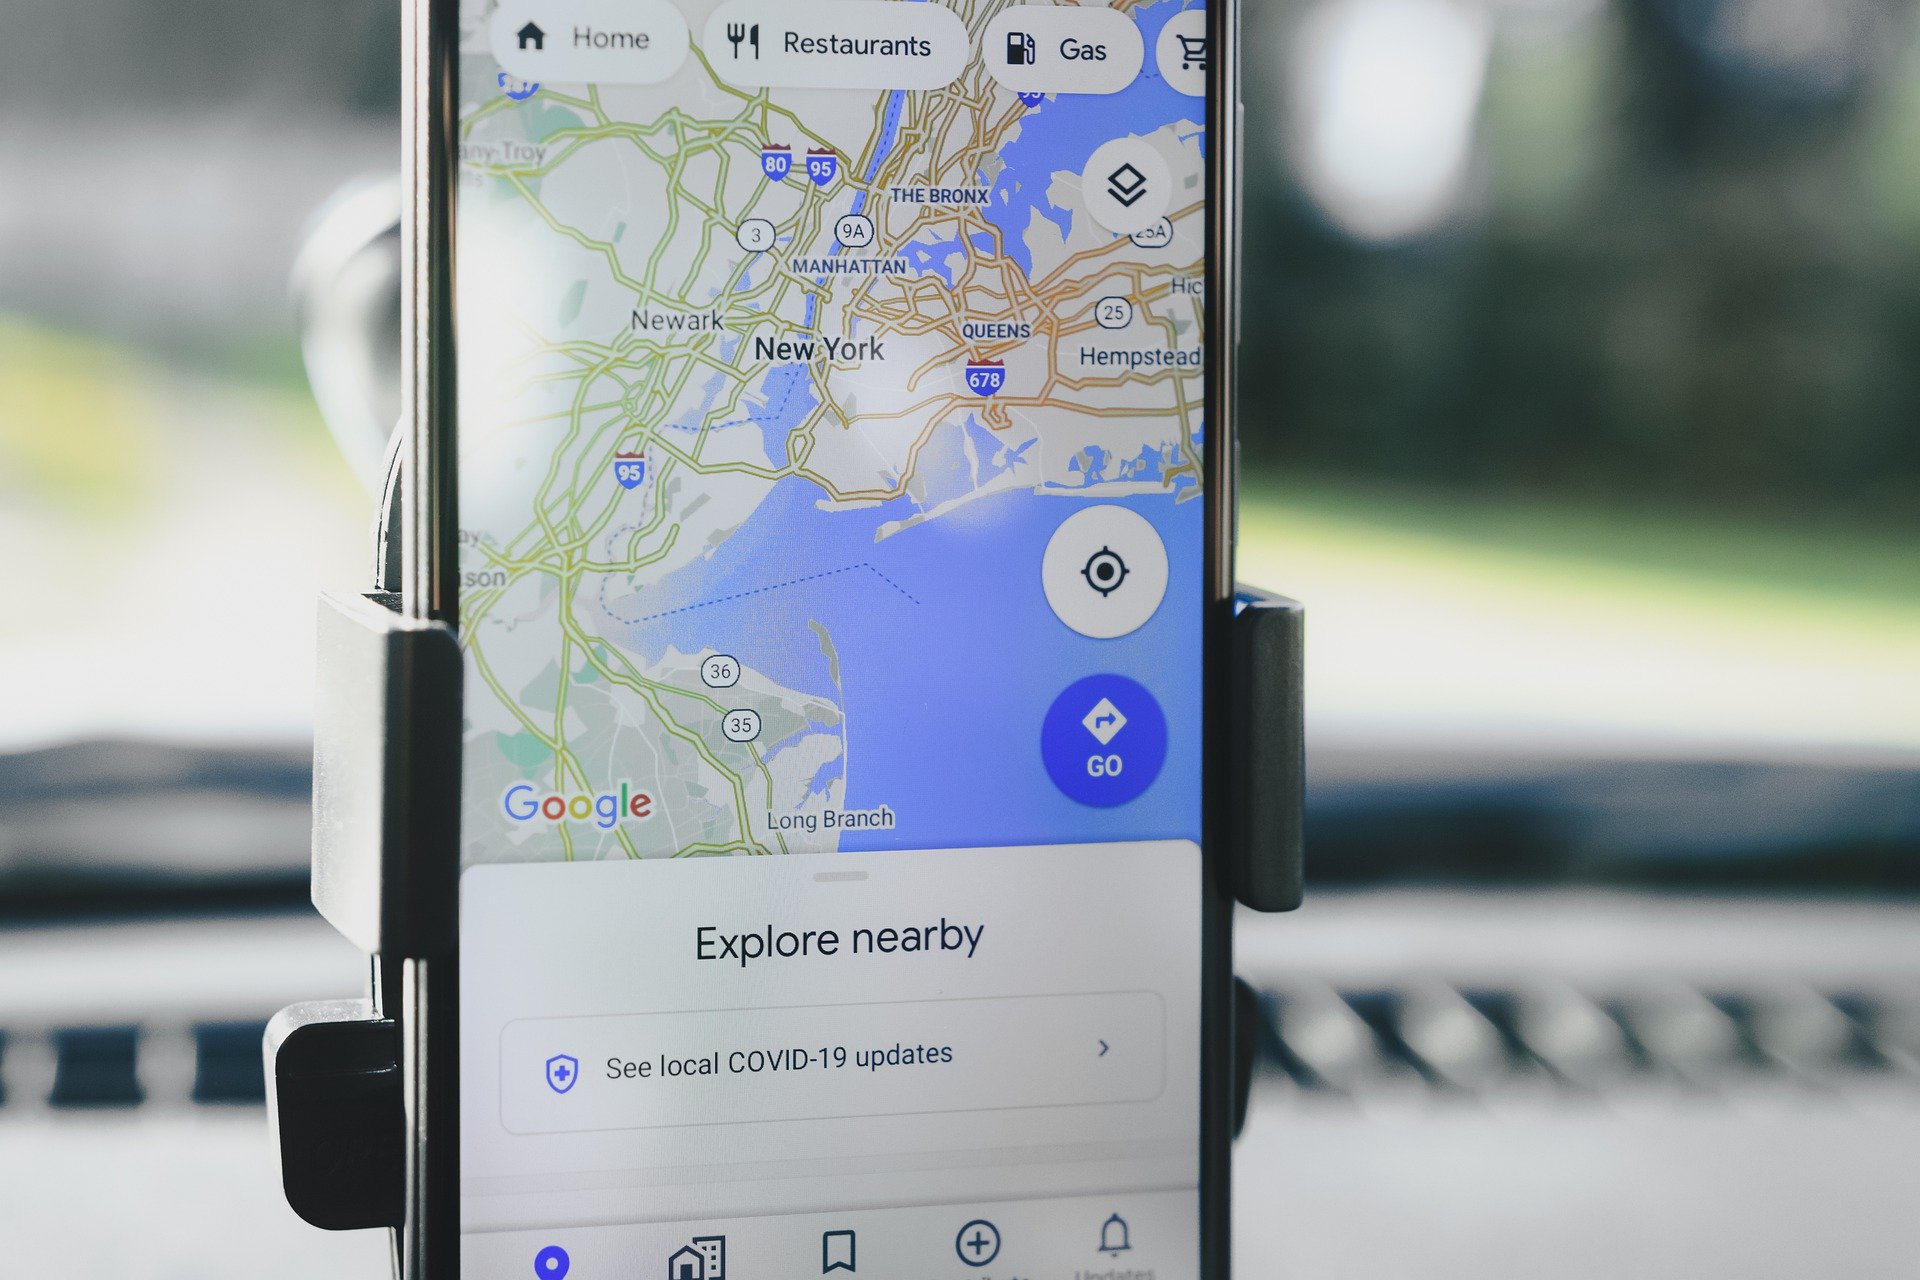 Google Maps Rolls Out Several New Features, Including a Community Feed